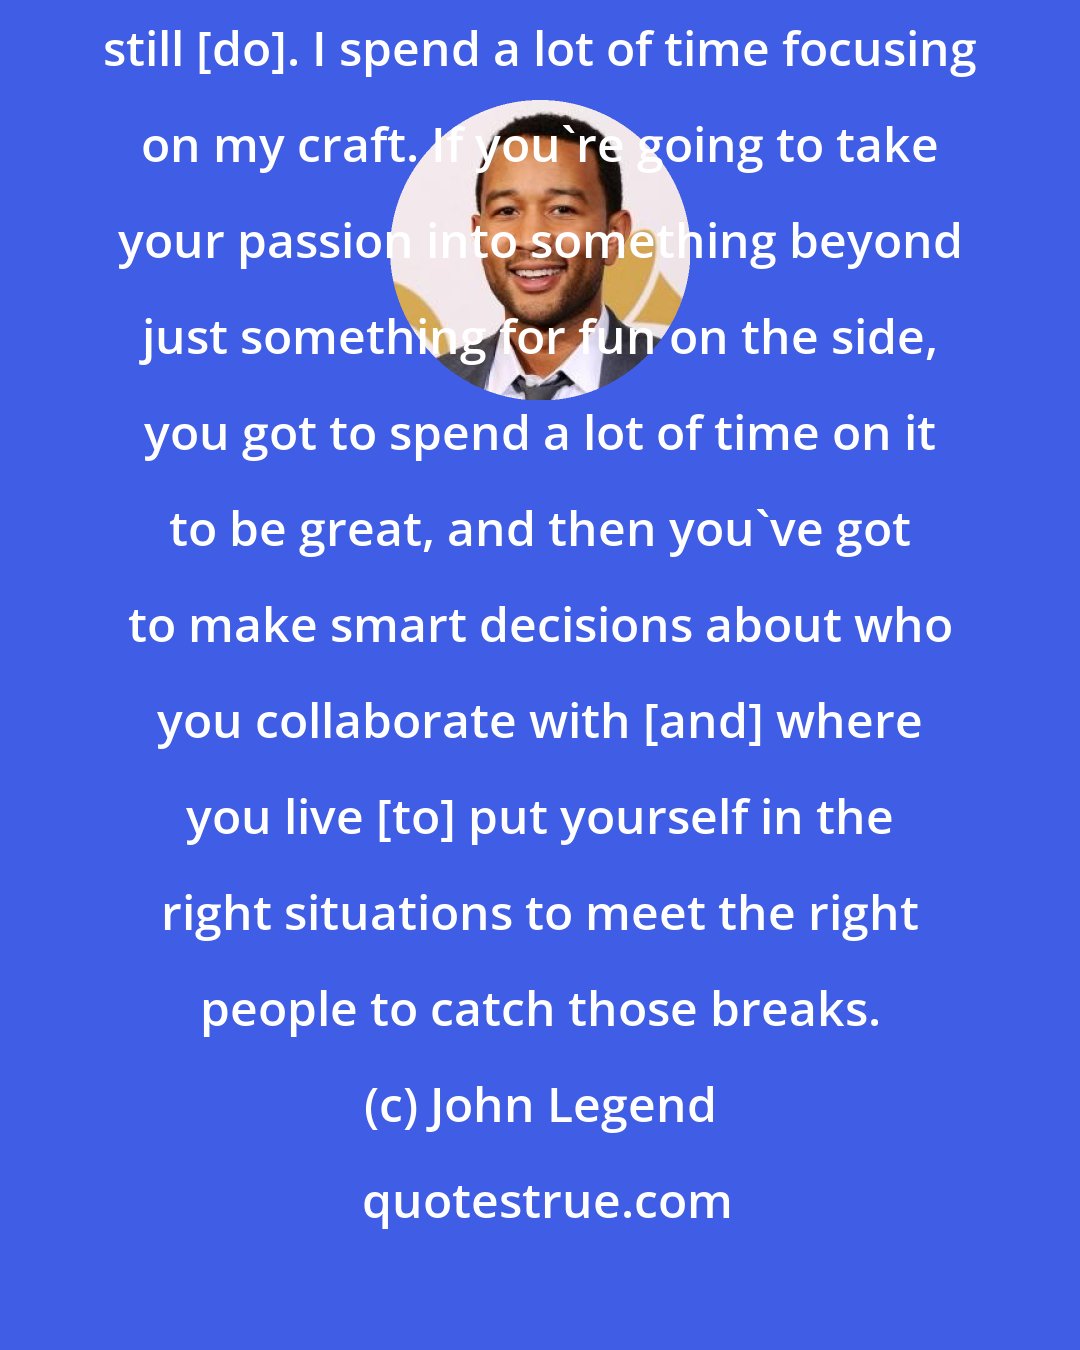 John Legend: I spent a lot of time, a lot of energy trying to be a better artist and I still [do]. I spend a lot of time focusing on my craft. If you're going to take your passion into something beyond just something for fun on the side, you got to spend a lot of time on it to be great, and then you've got to make smart decisions about who you collaborate with [and] where you live [to] put yourself in the right situations to meet the right people to catch those breaks.